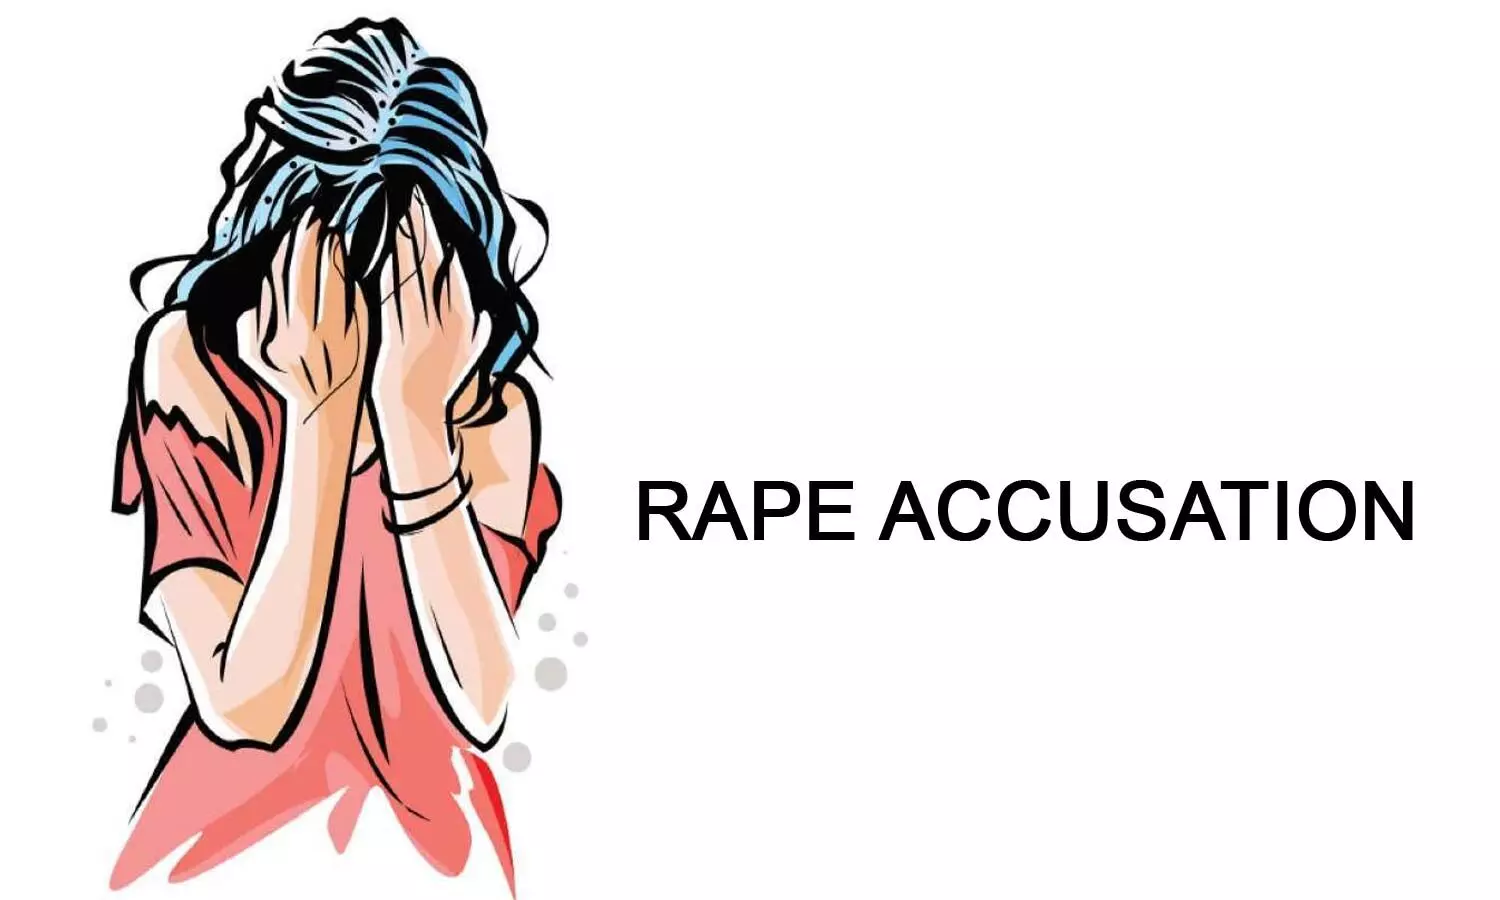 Raipur: MBBS doctor Booked After Ayurveda practitioner Alleges Rape, Sexual harassment